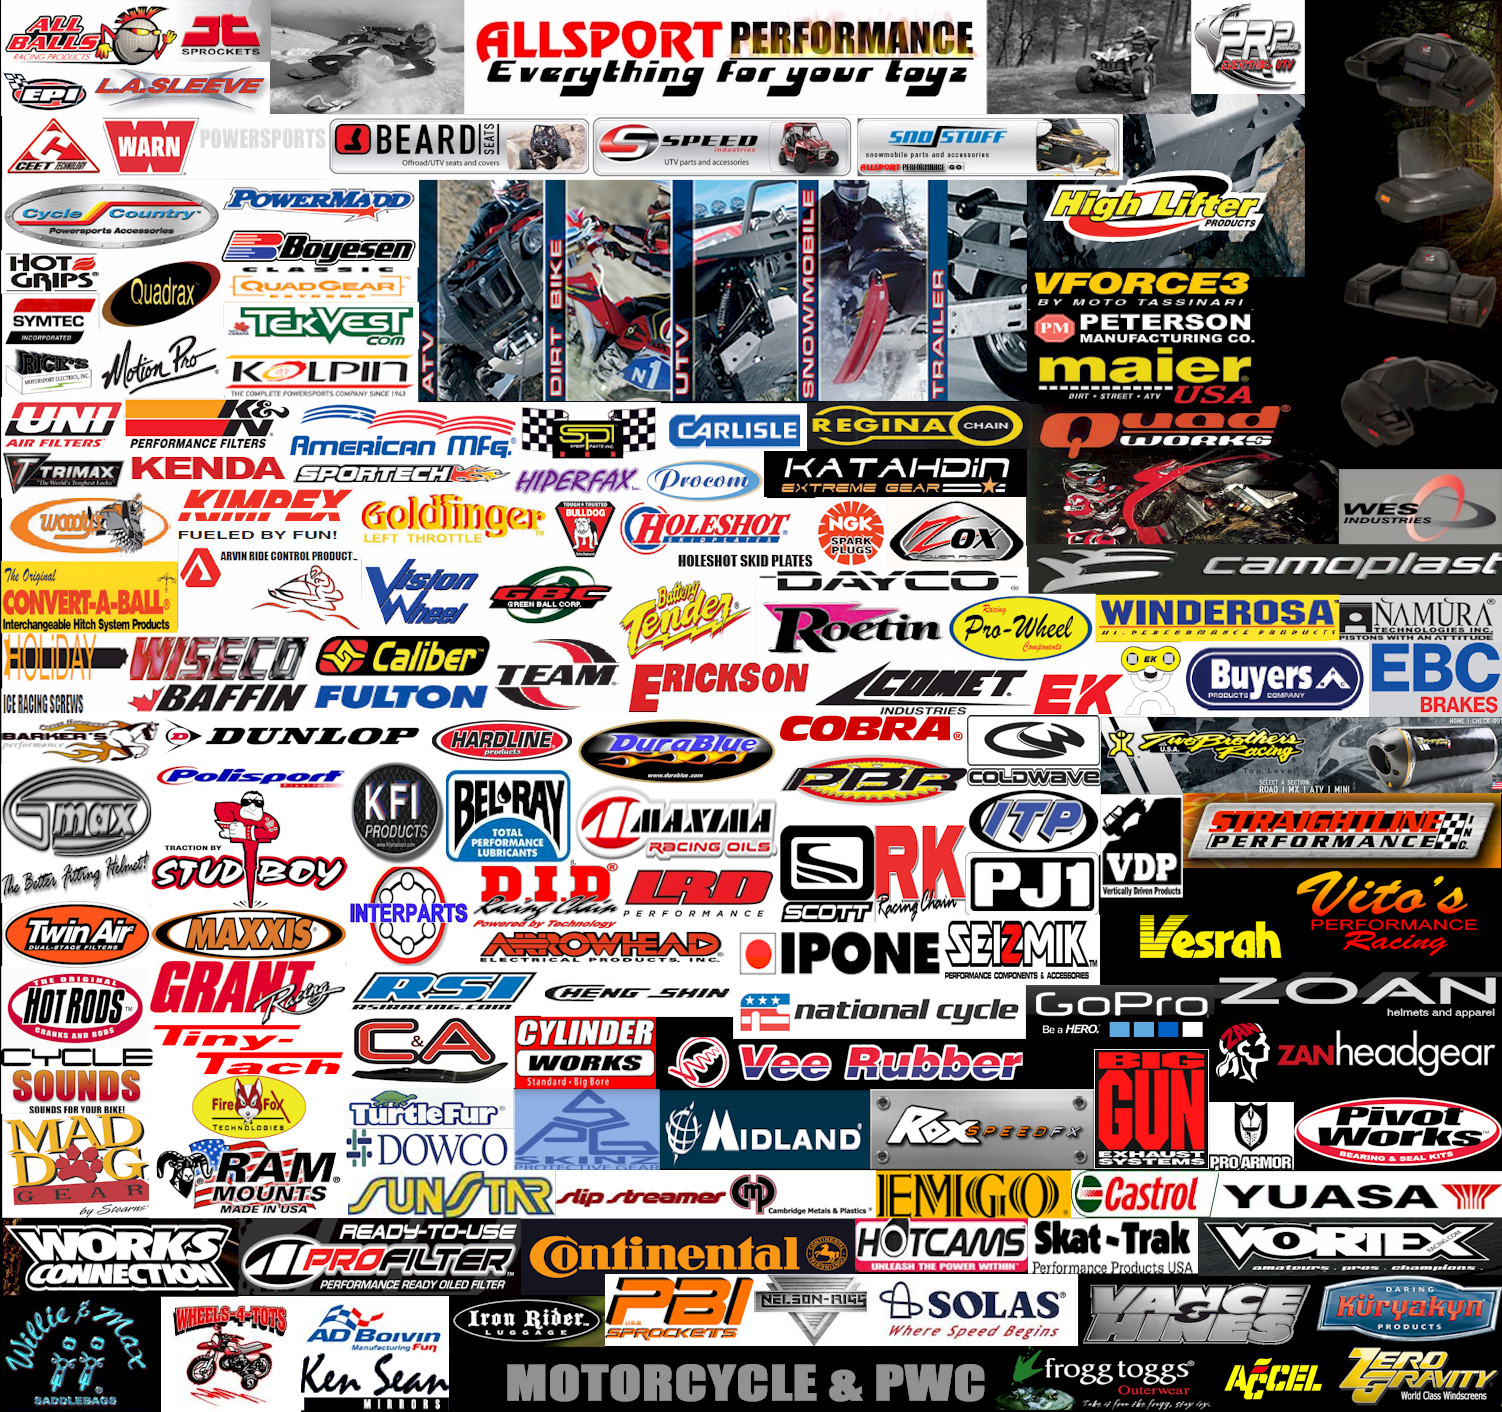 ATV SNOWMOBILE UTV MOTORCYCLE TRAILER PWC PARTS AND ACCESSORIES IN MAINE. ALLSPORT PERFORMANCE INC.